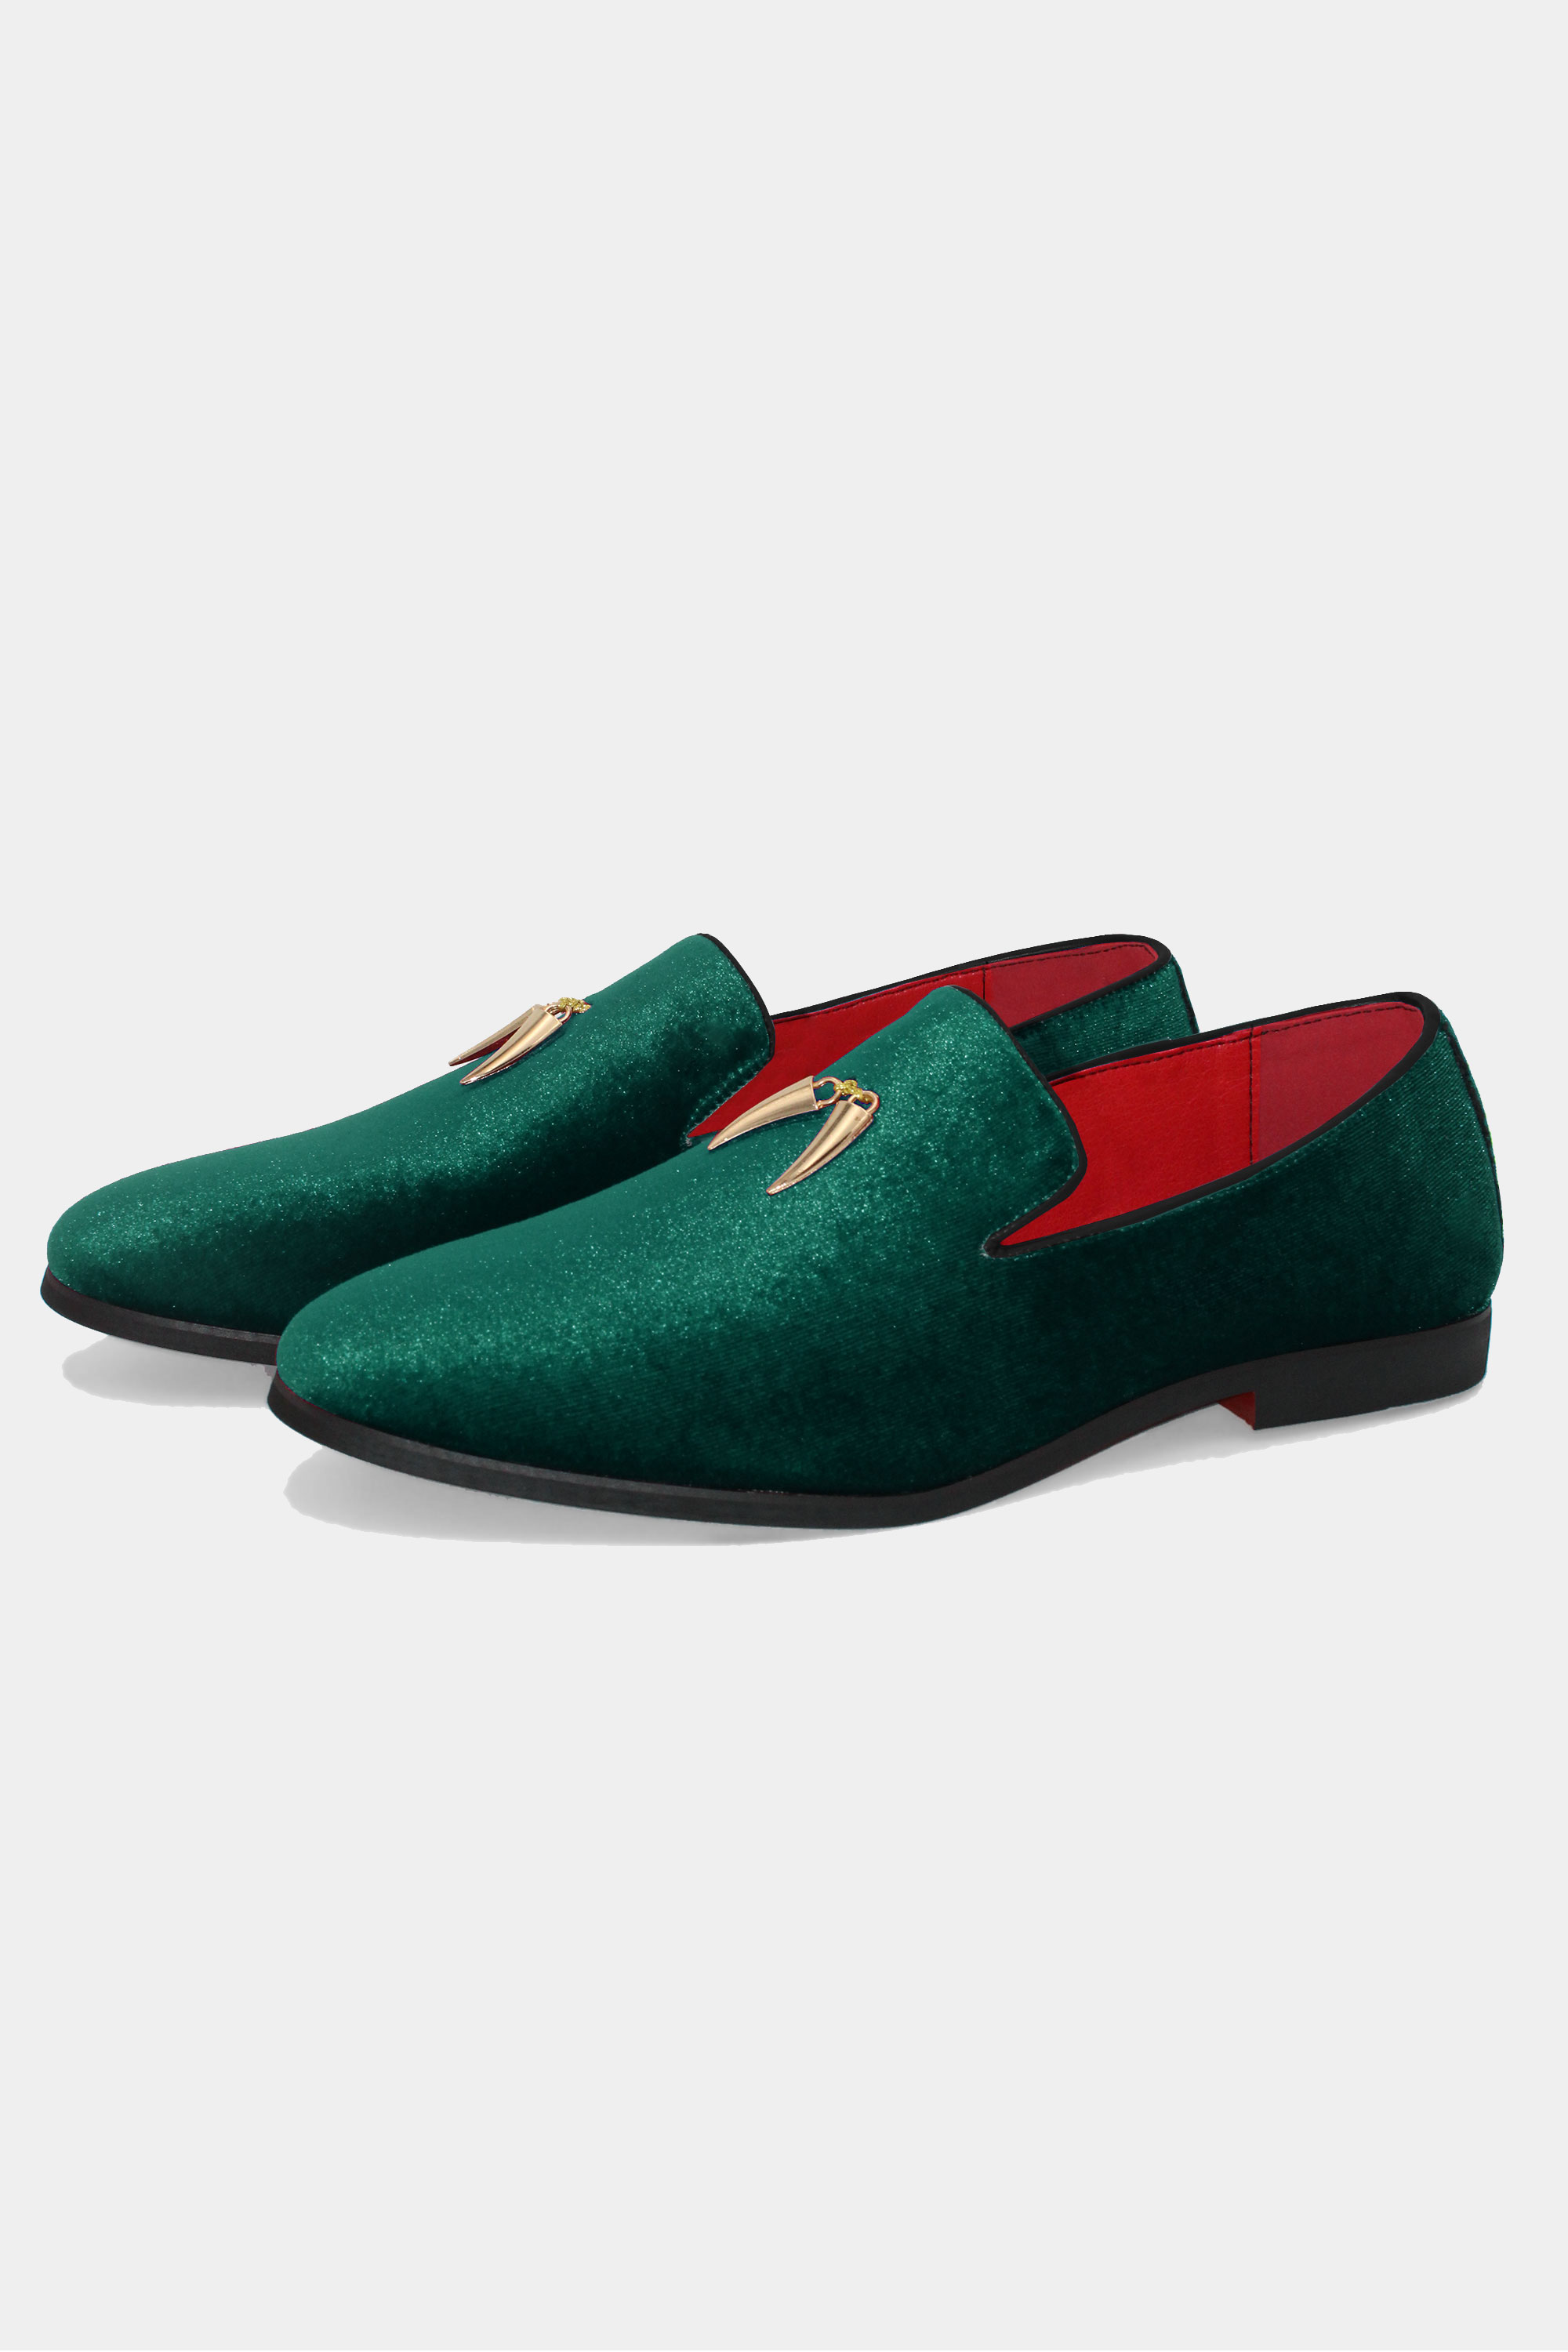 Emerald Green Velvet Loafers with Gold Tassels